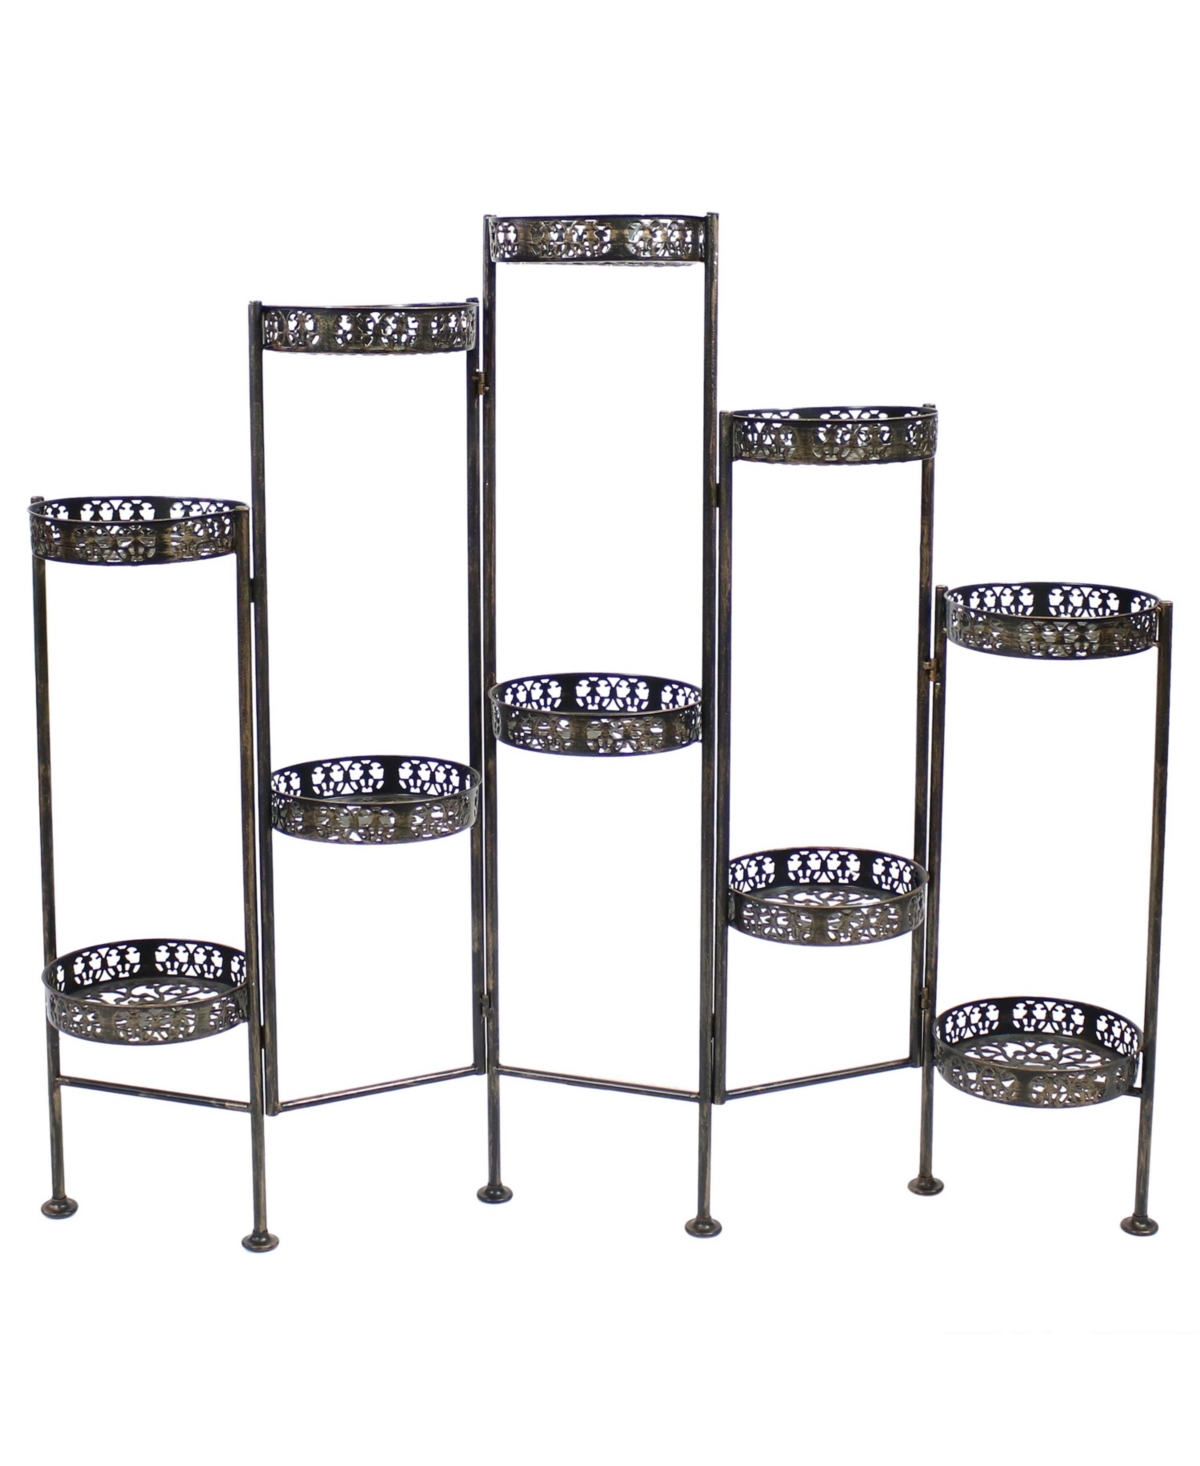 Bronze Steel 10-Tier Staggered Folding Plant Stand - 46.5 in - Black